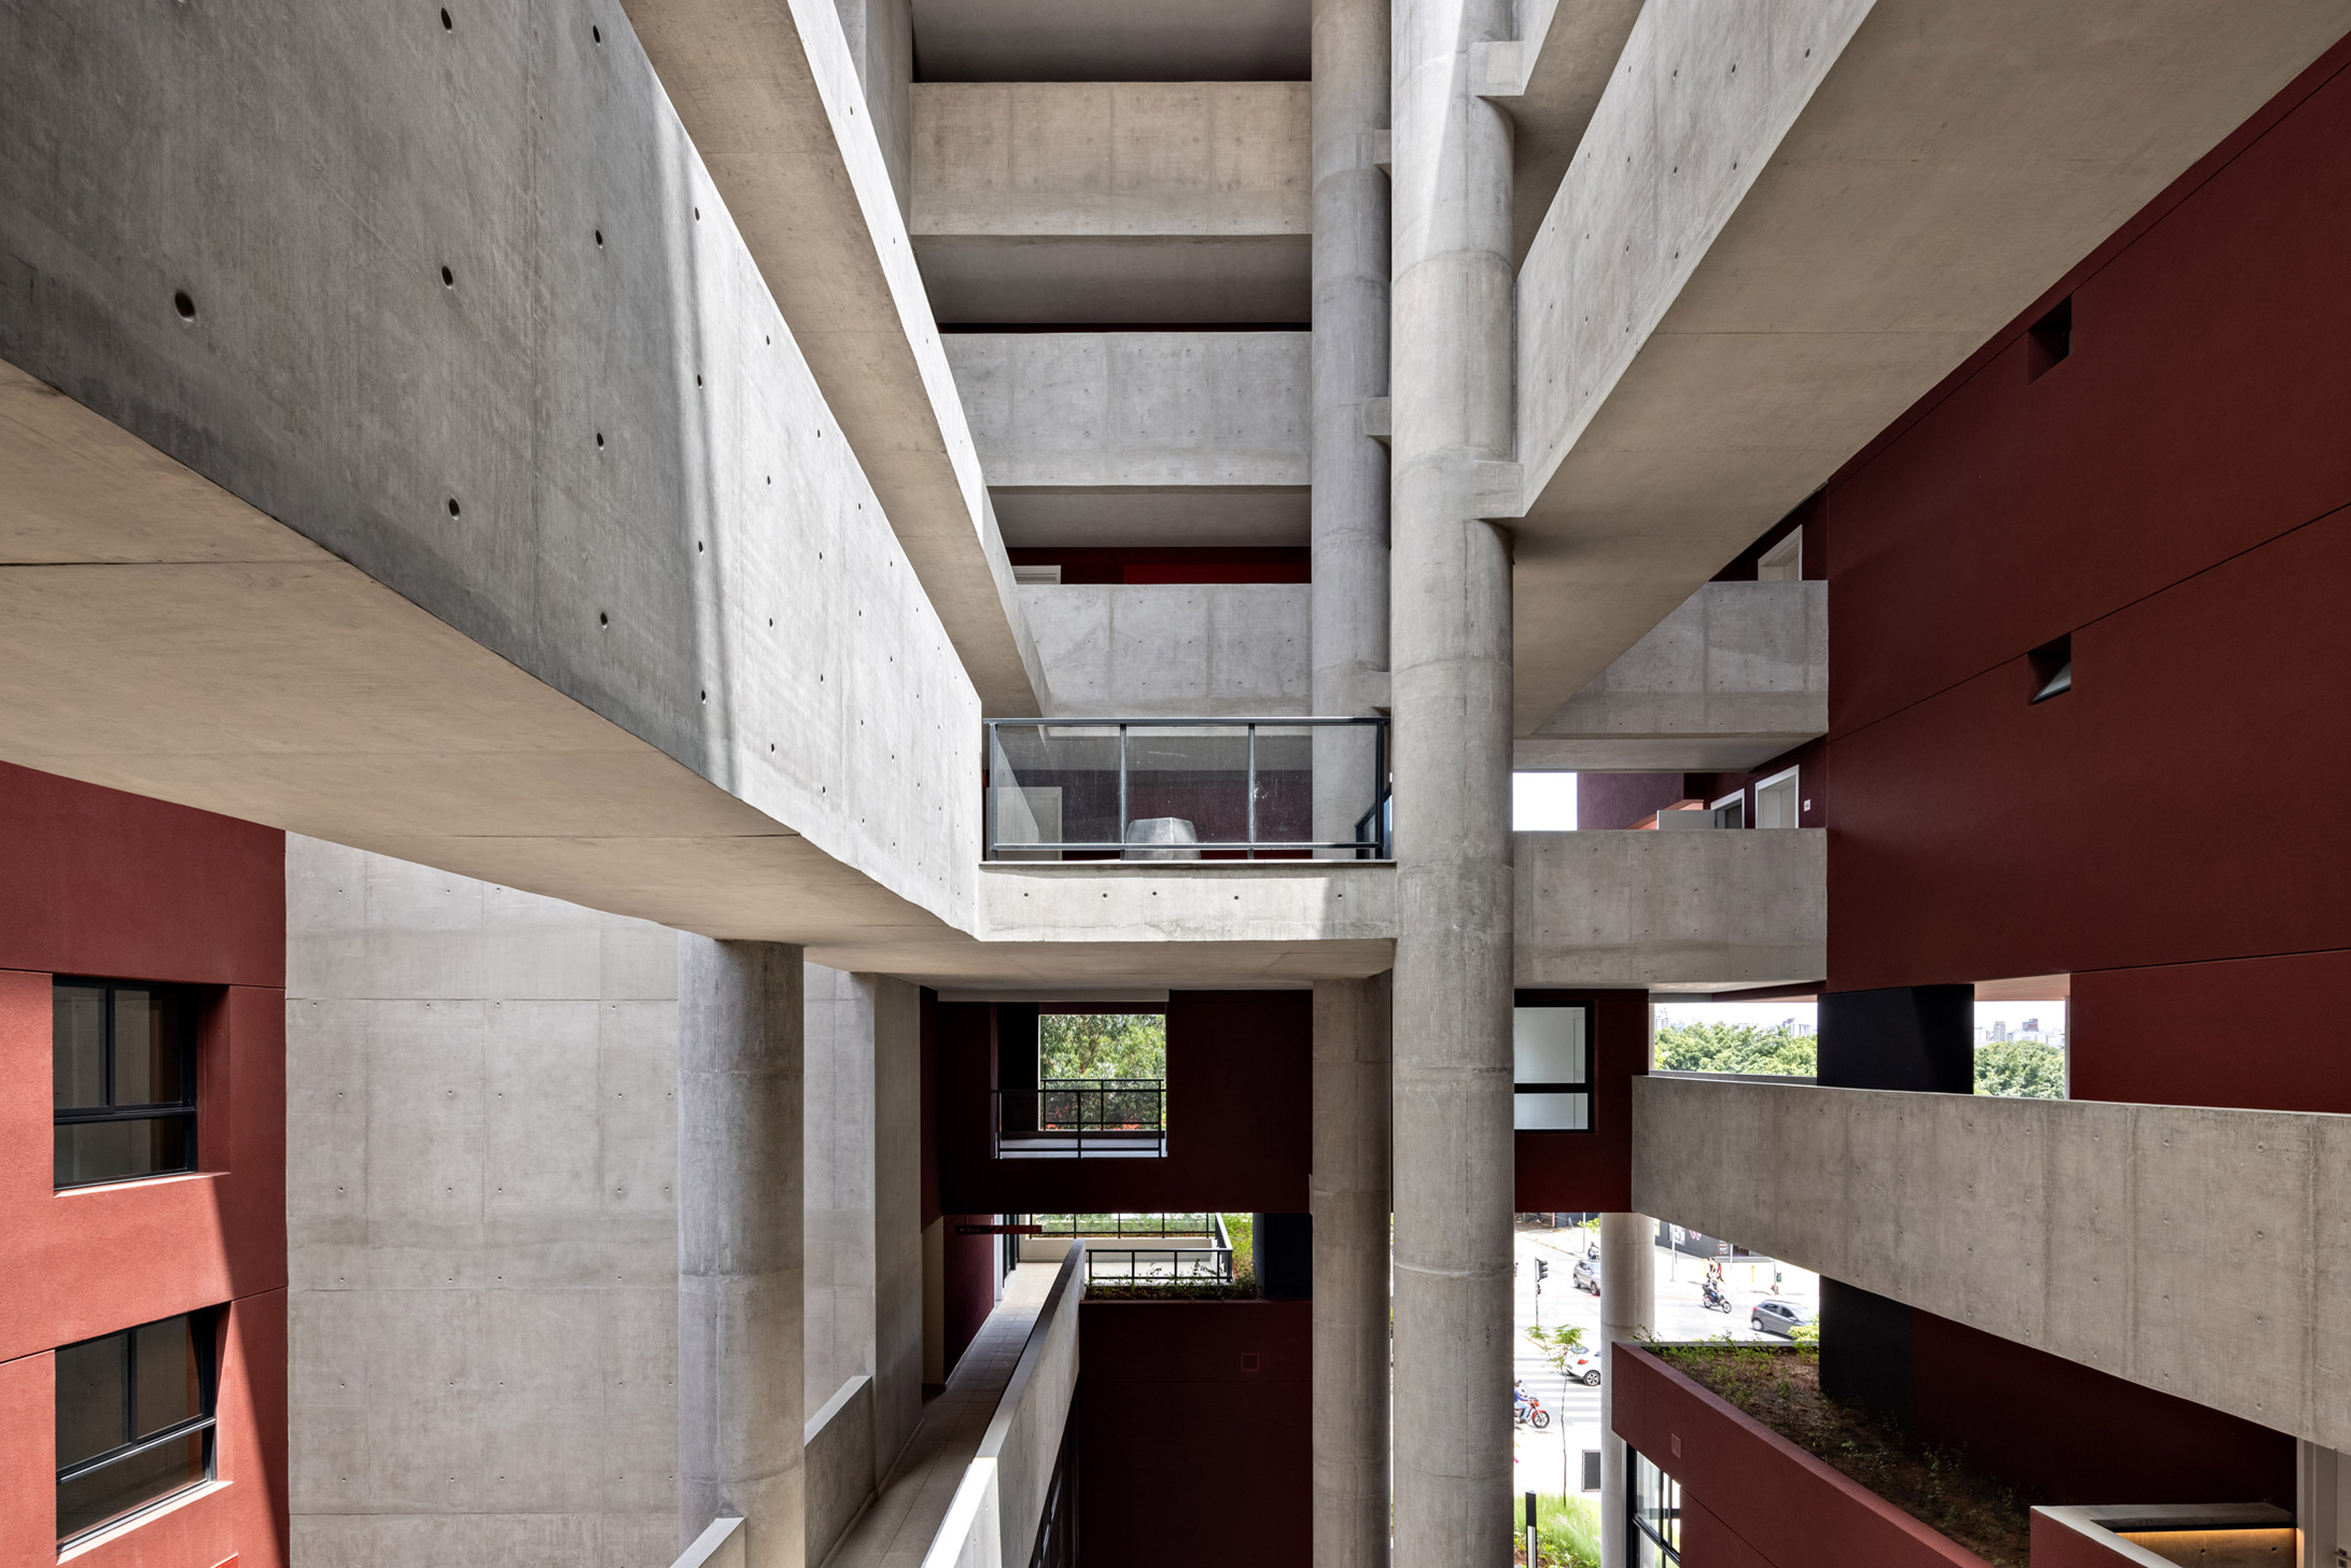 Concrete collumns and walkways